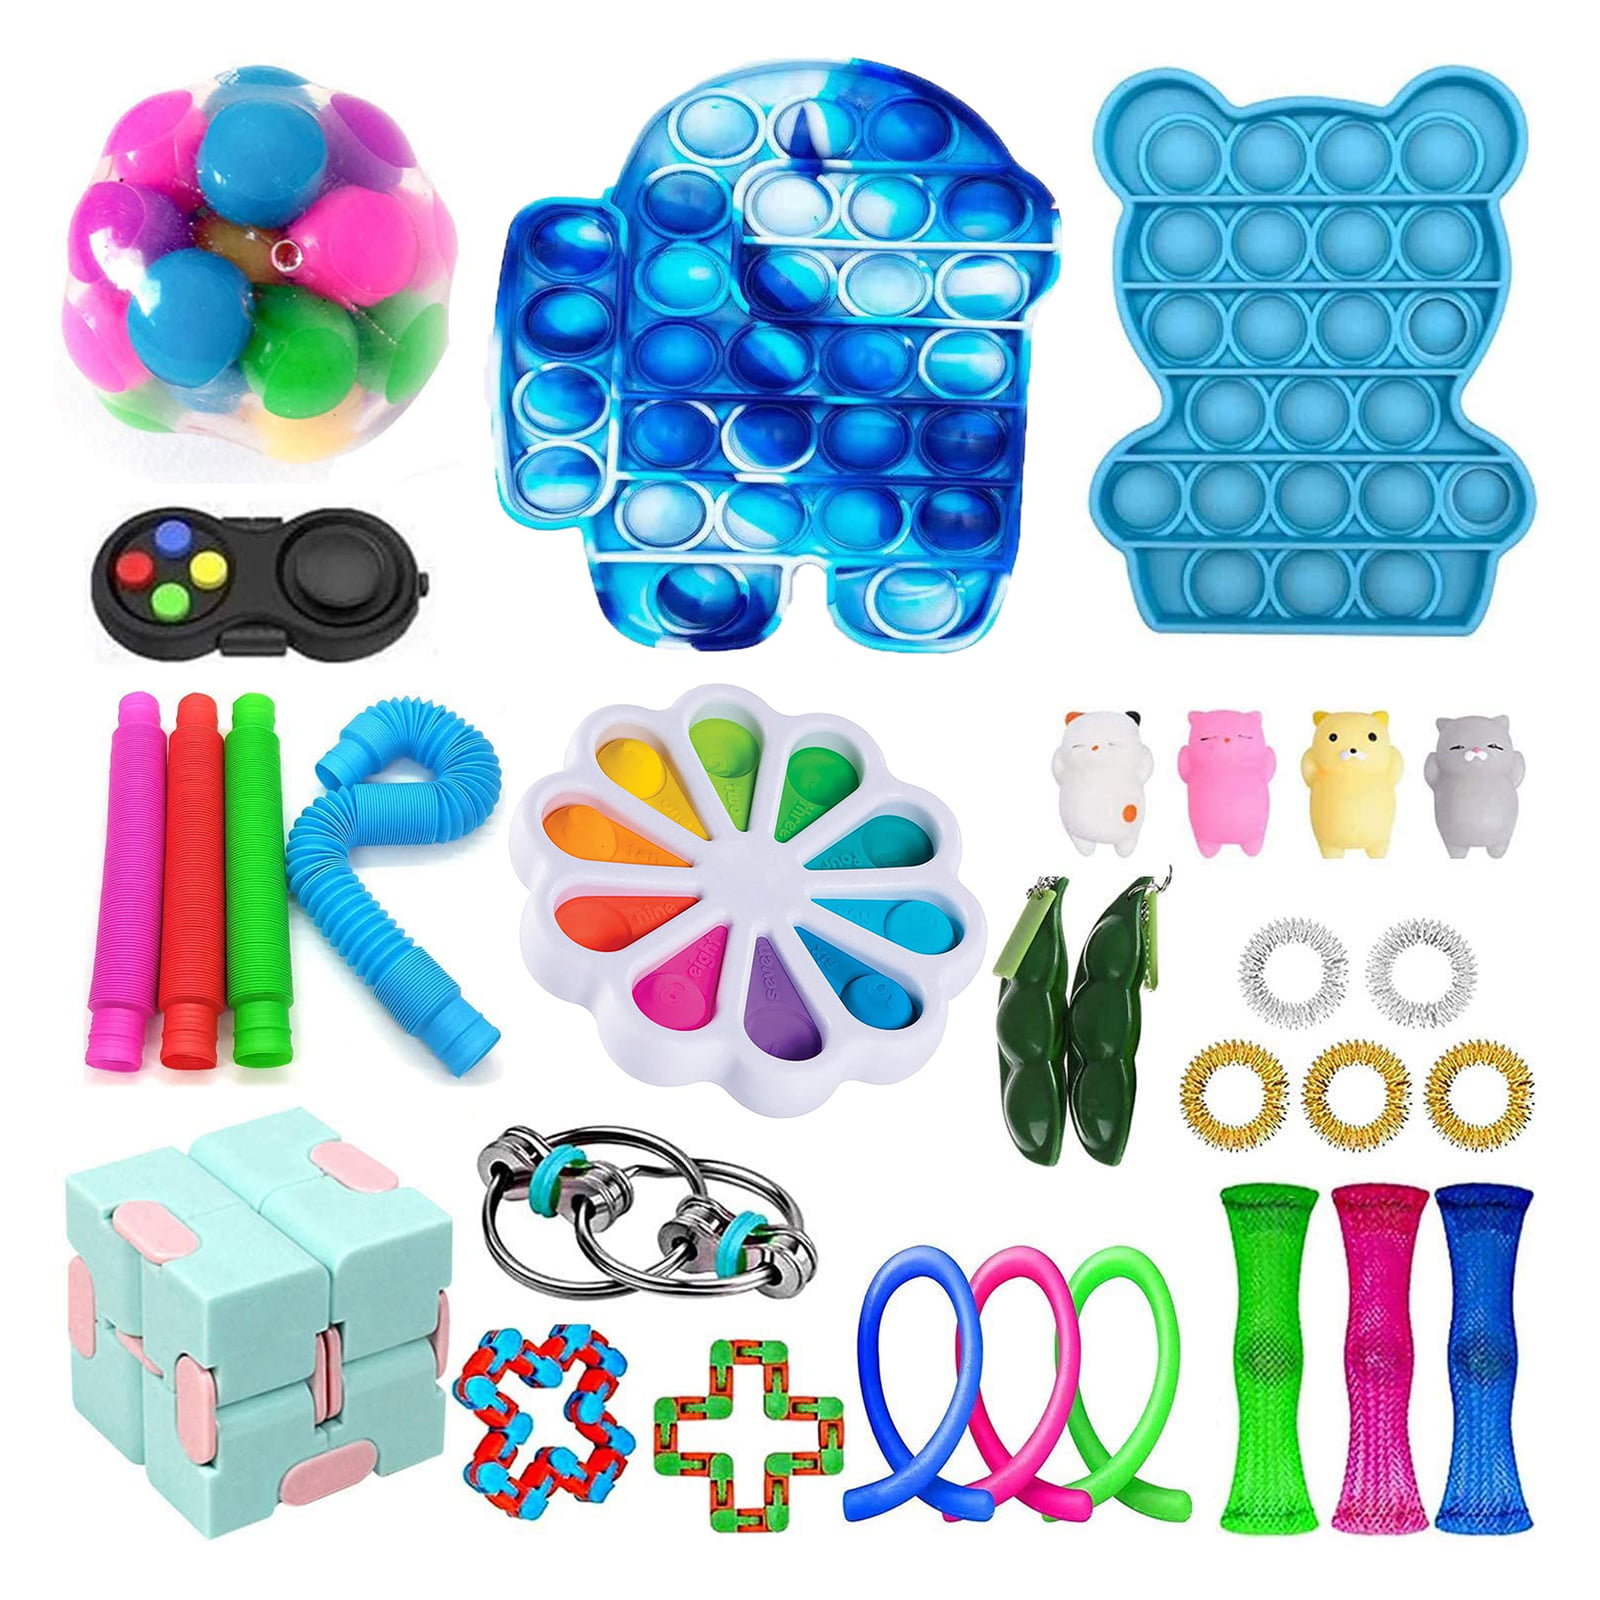 Details about   35 Pack Fidget Toy Sensory for ADD OCD Autistic Children Adult Anti-Stress Box 